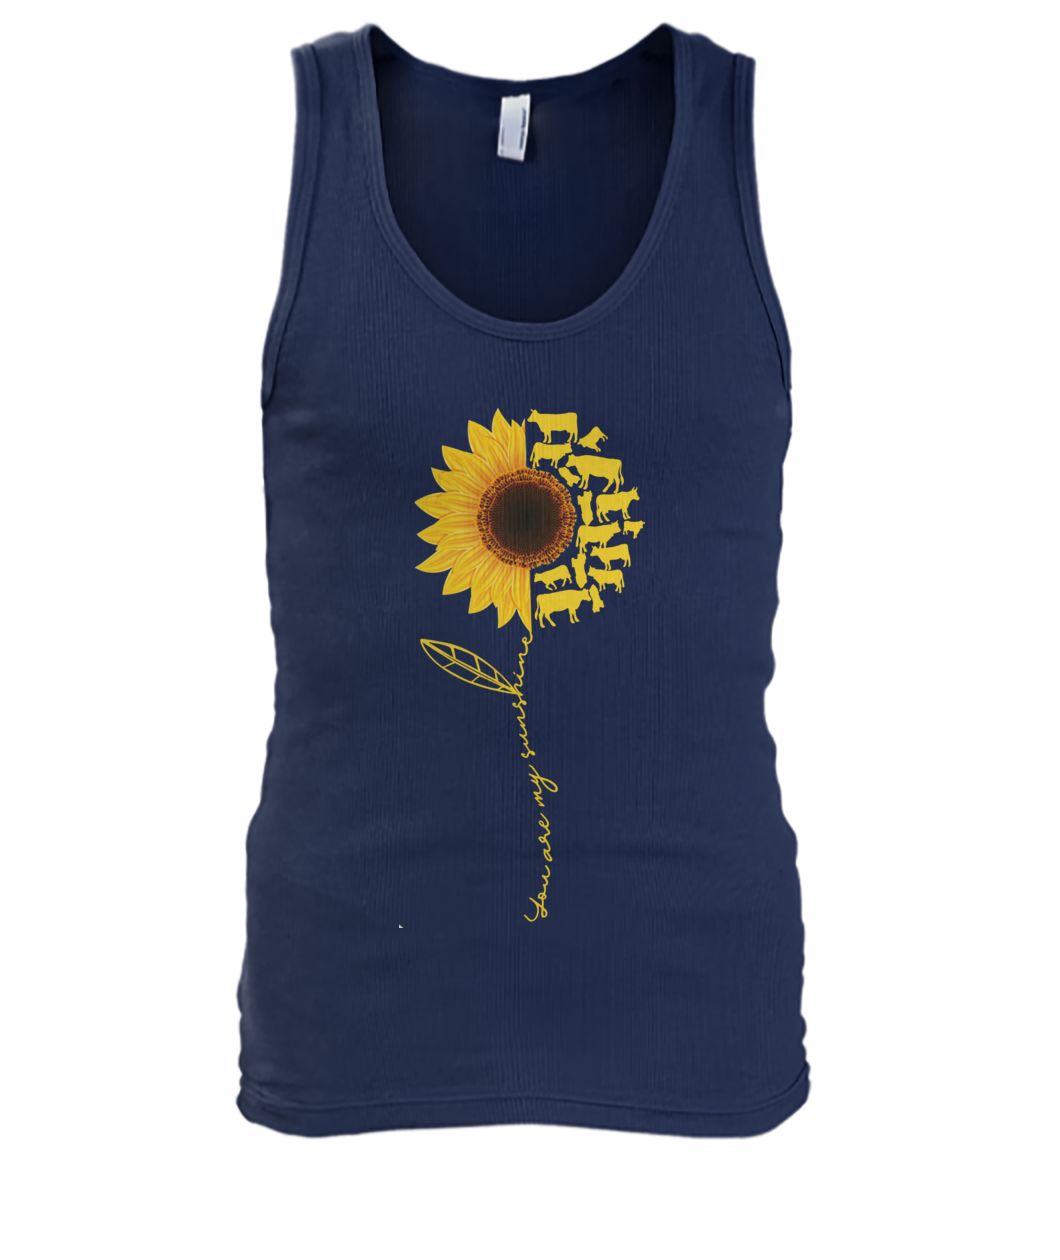 You are my sunshine sunflower cow men's tank top